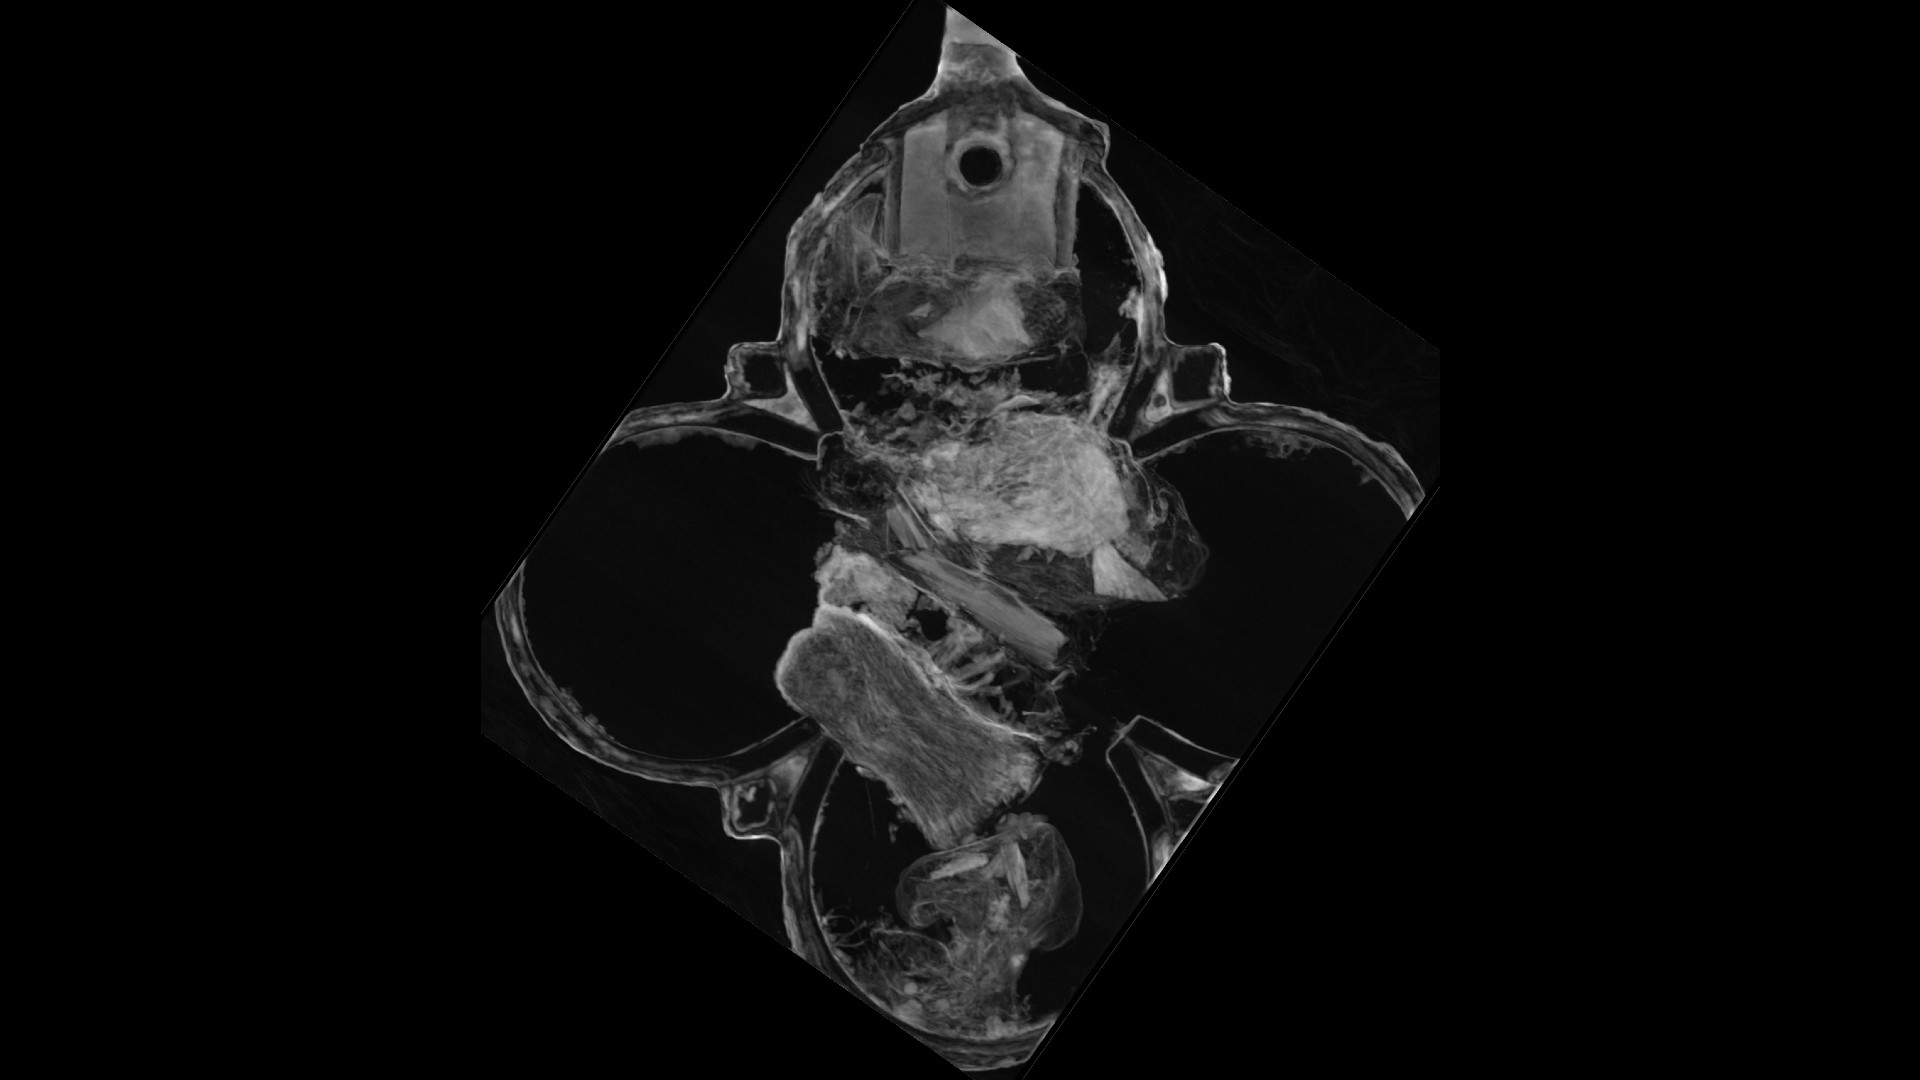 The researchers hope that further imaging with neutron tomography will reveal a strip of parchment or paper inside the pendant, with letters they can read that state which saint the bones are from.